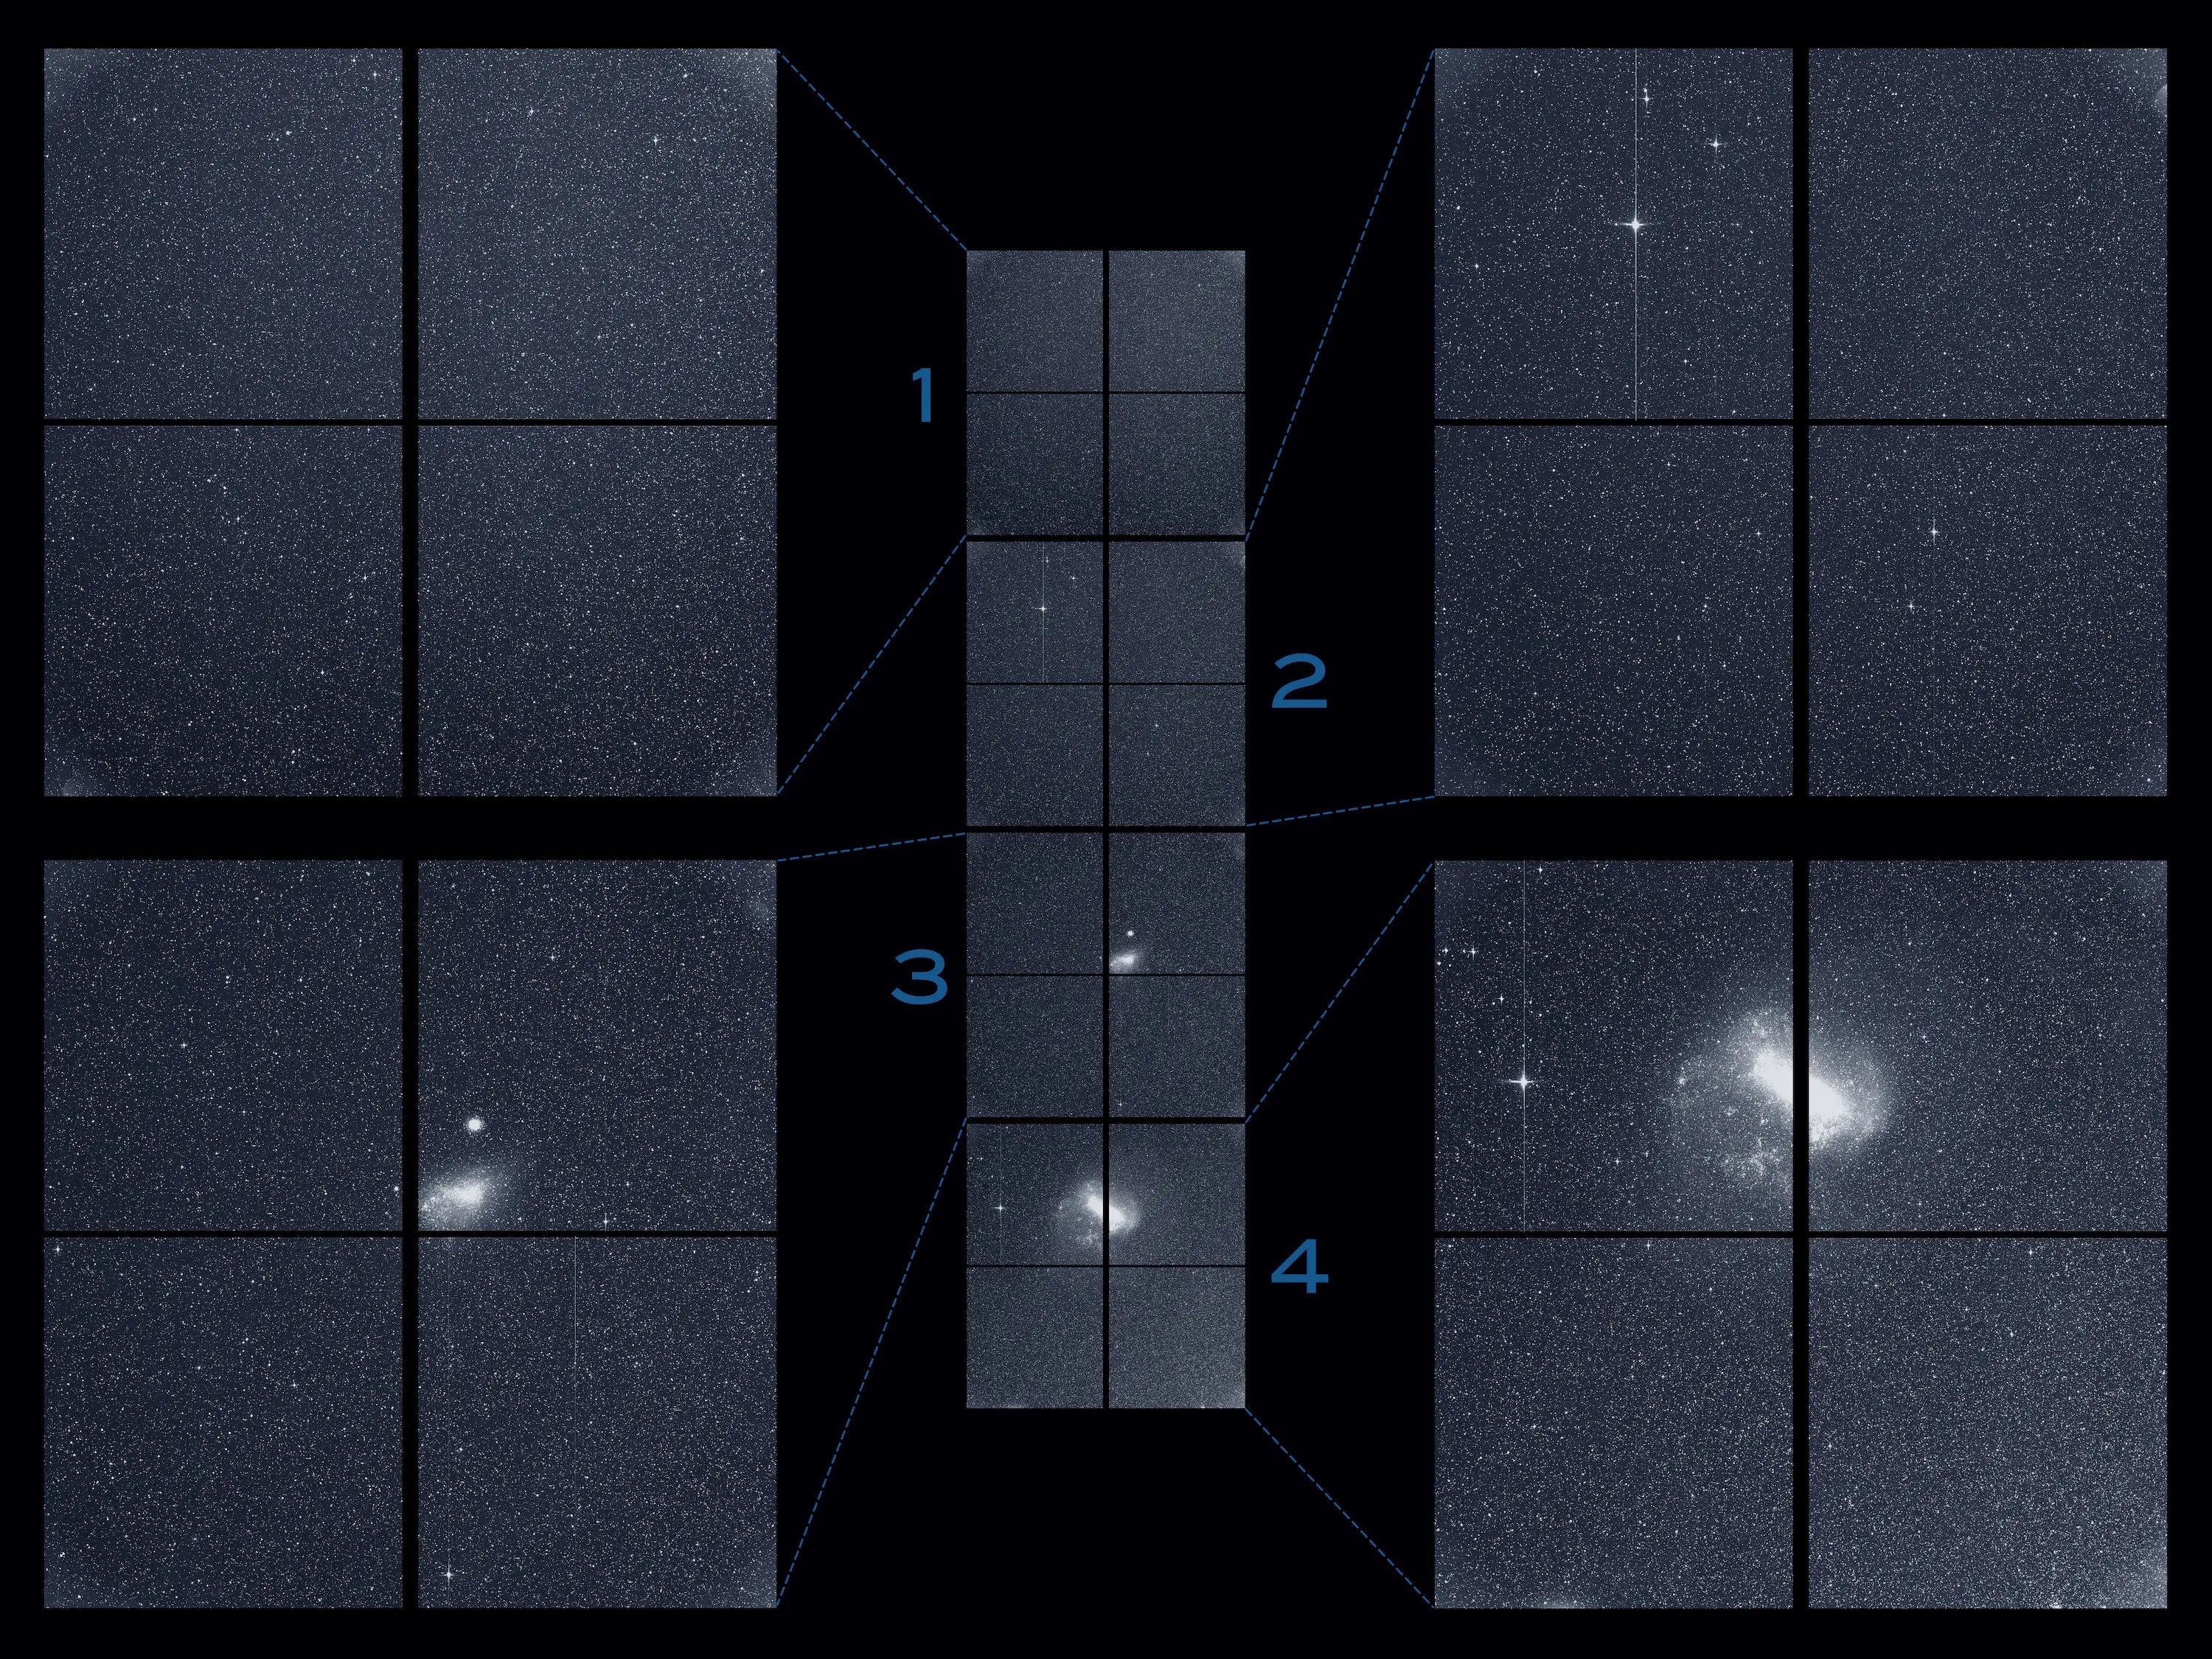 The Transiting Exoplanet Survey Satellite (TESS) captured this strip of stars and galaxies in the southern sky during one 30-minute period on Tuesday, Aug. 7. Created by combining the view from all four of its cameras, this is TESS’ “first light,” from the first observing sector that will be used for identifying planets around other stars.